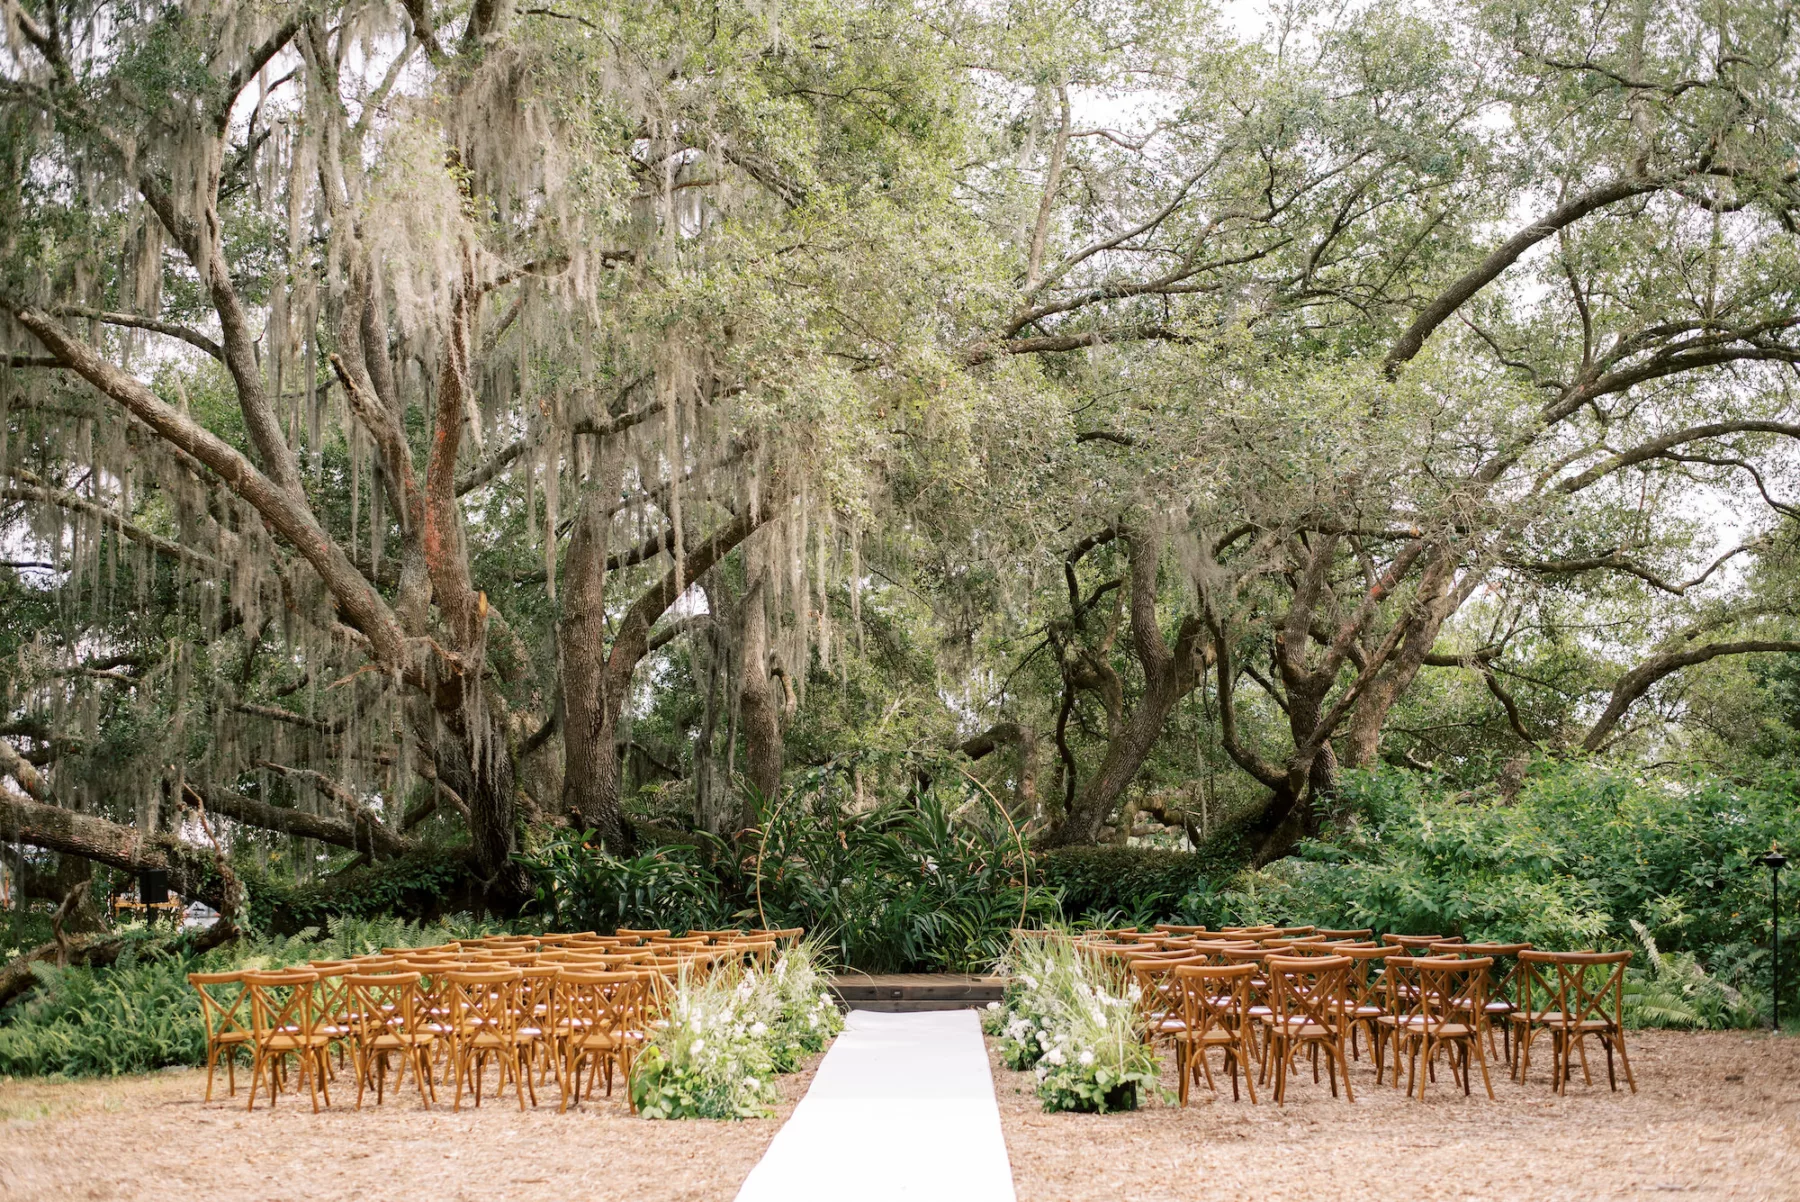 The Broken Oak Whimsical Wedding Ceremony Decor Inspiration | Wooden Crossback Chairs | Gold Hoop Arch Ideas | Tampa Bay Event Venue Mill Pond Estate